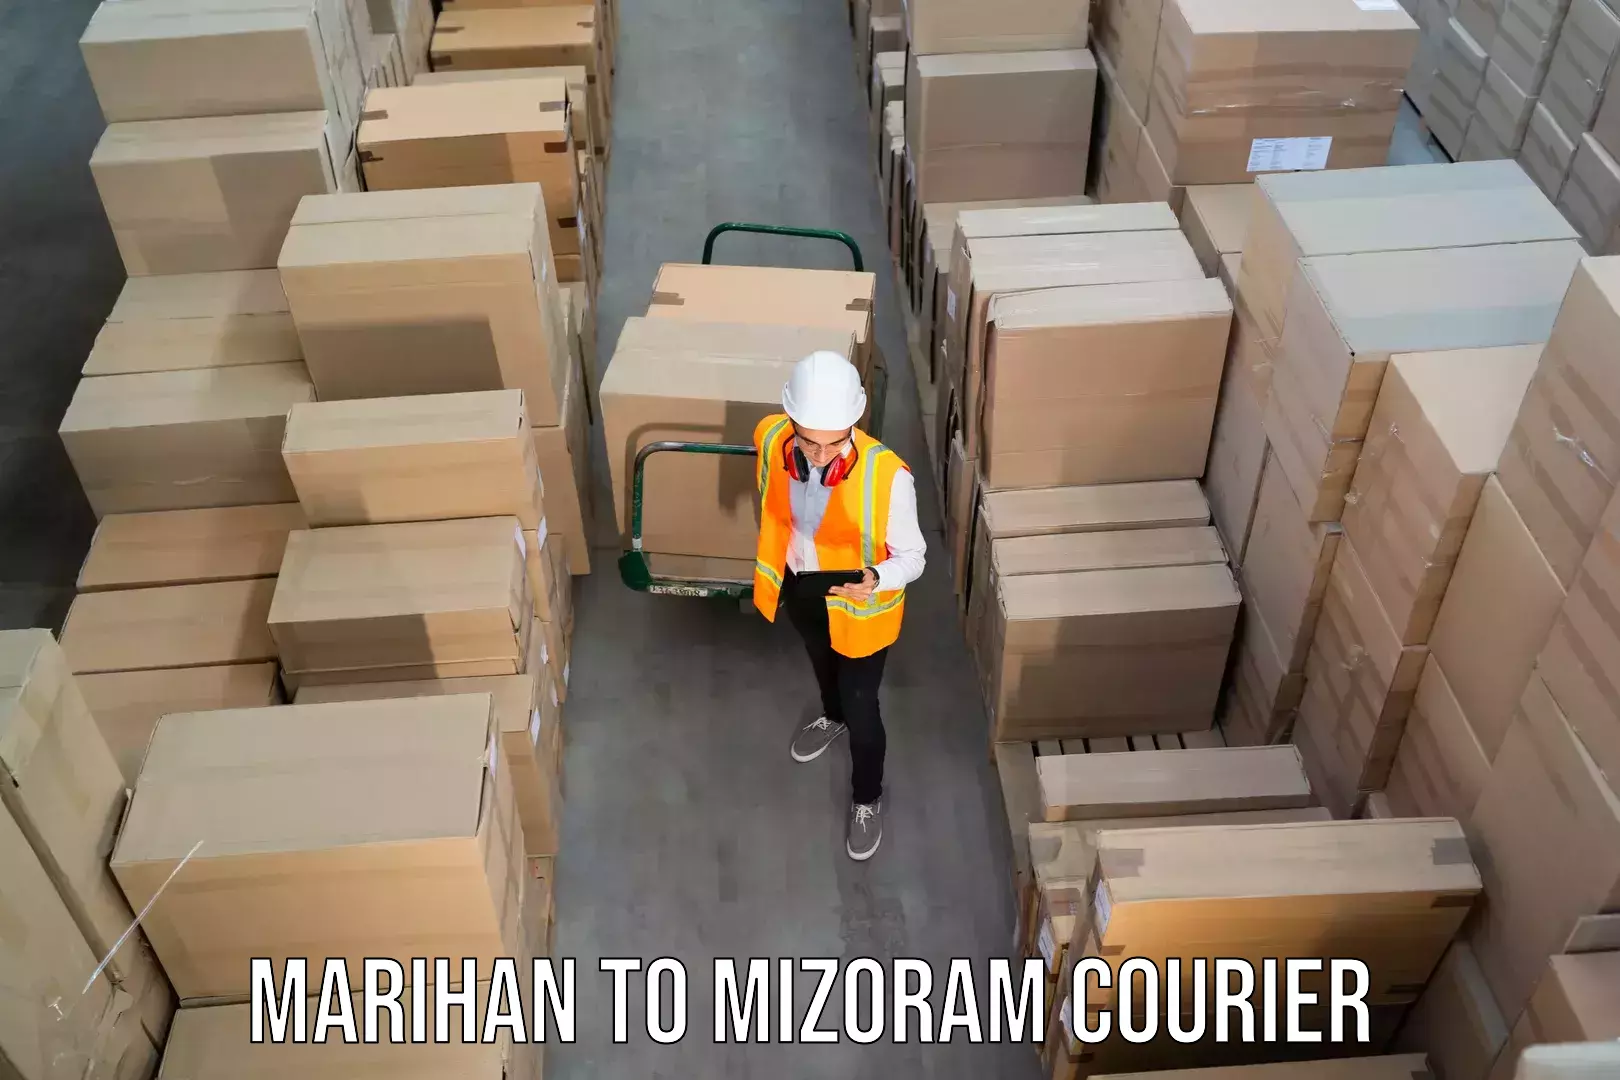 Express package services Marihan to Darlawn